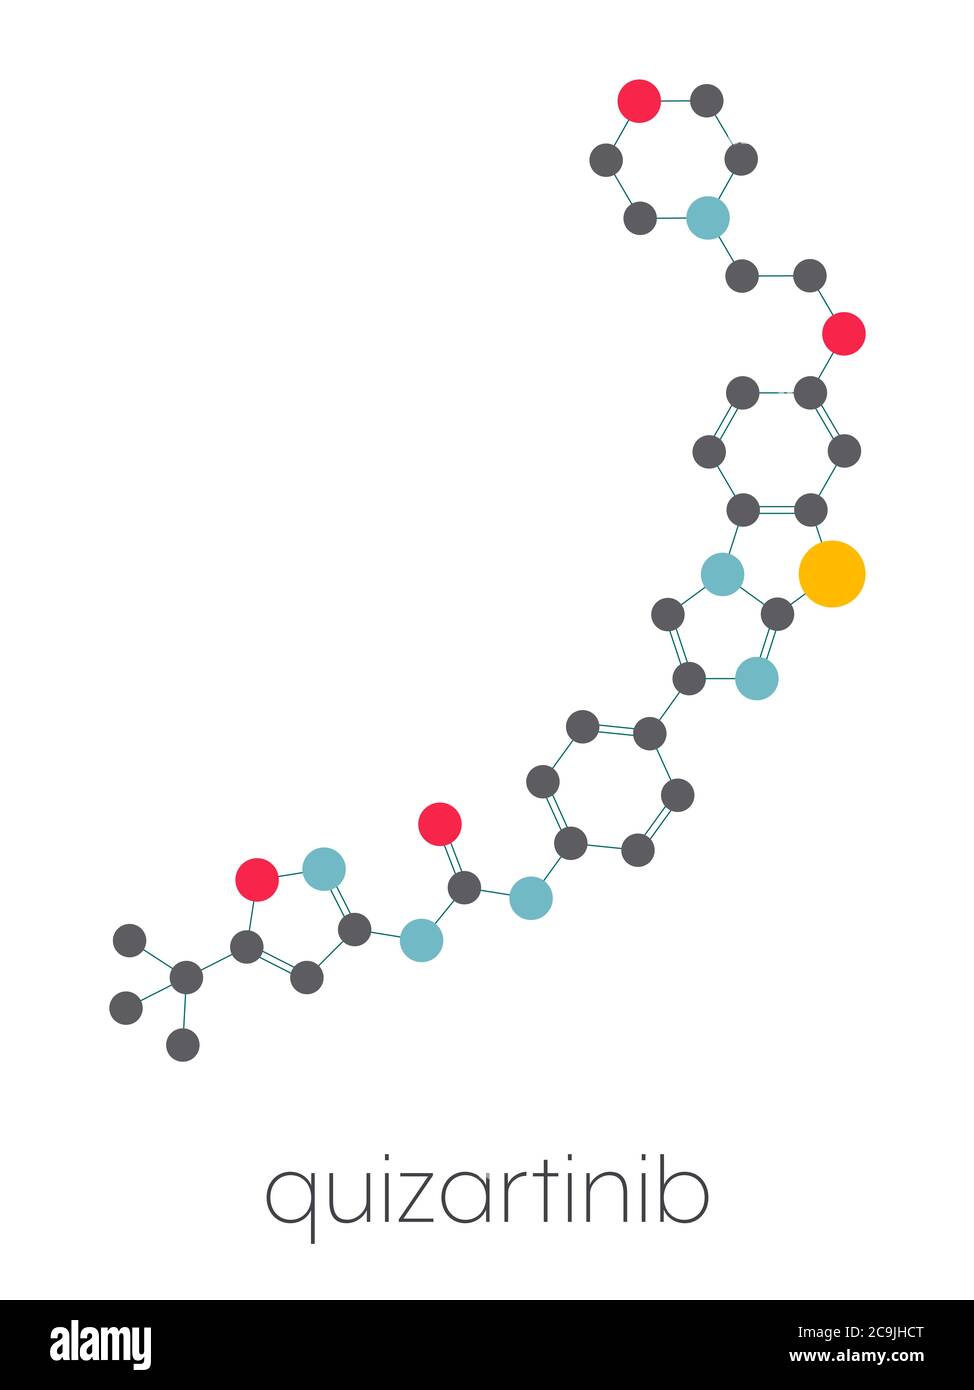 Quizartinib cancer drug molecule (kinase inhibitor). Stylized skeletal formula (chemical structure): Atoms are shown as color-coded circles connected Stock Photo